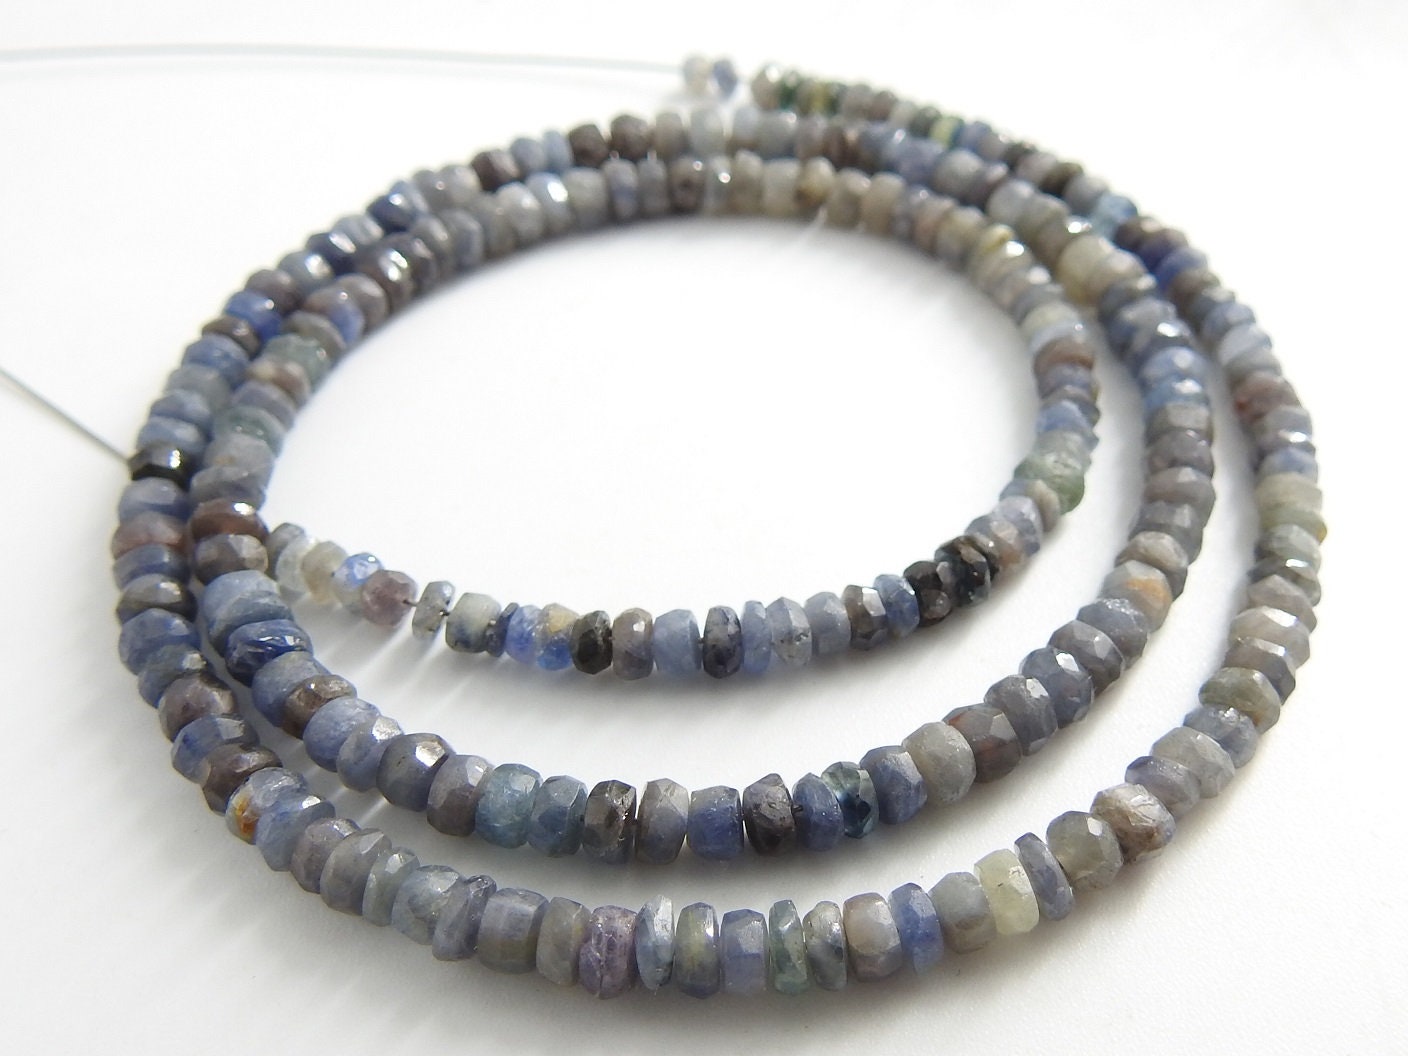 Blue Sapphire Faceted Roundel Bead,Multi Shaded,Burma Mines,Loose Stone,Handmade,For Jewelry Makers,16Inch Strand,100%Natural PMEB-13 | Save 33% - Rajasthan Living 19